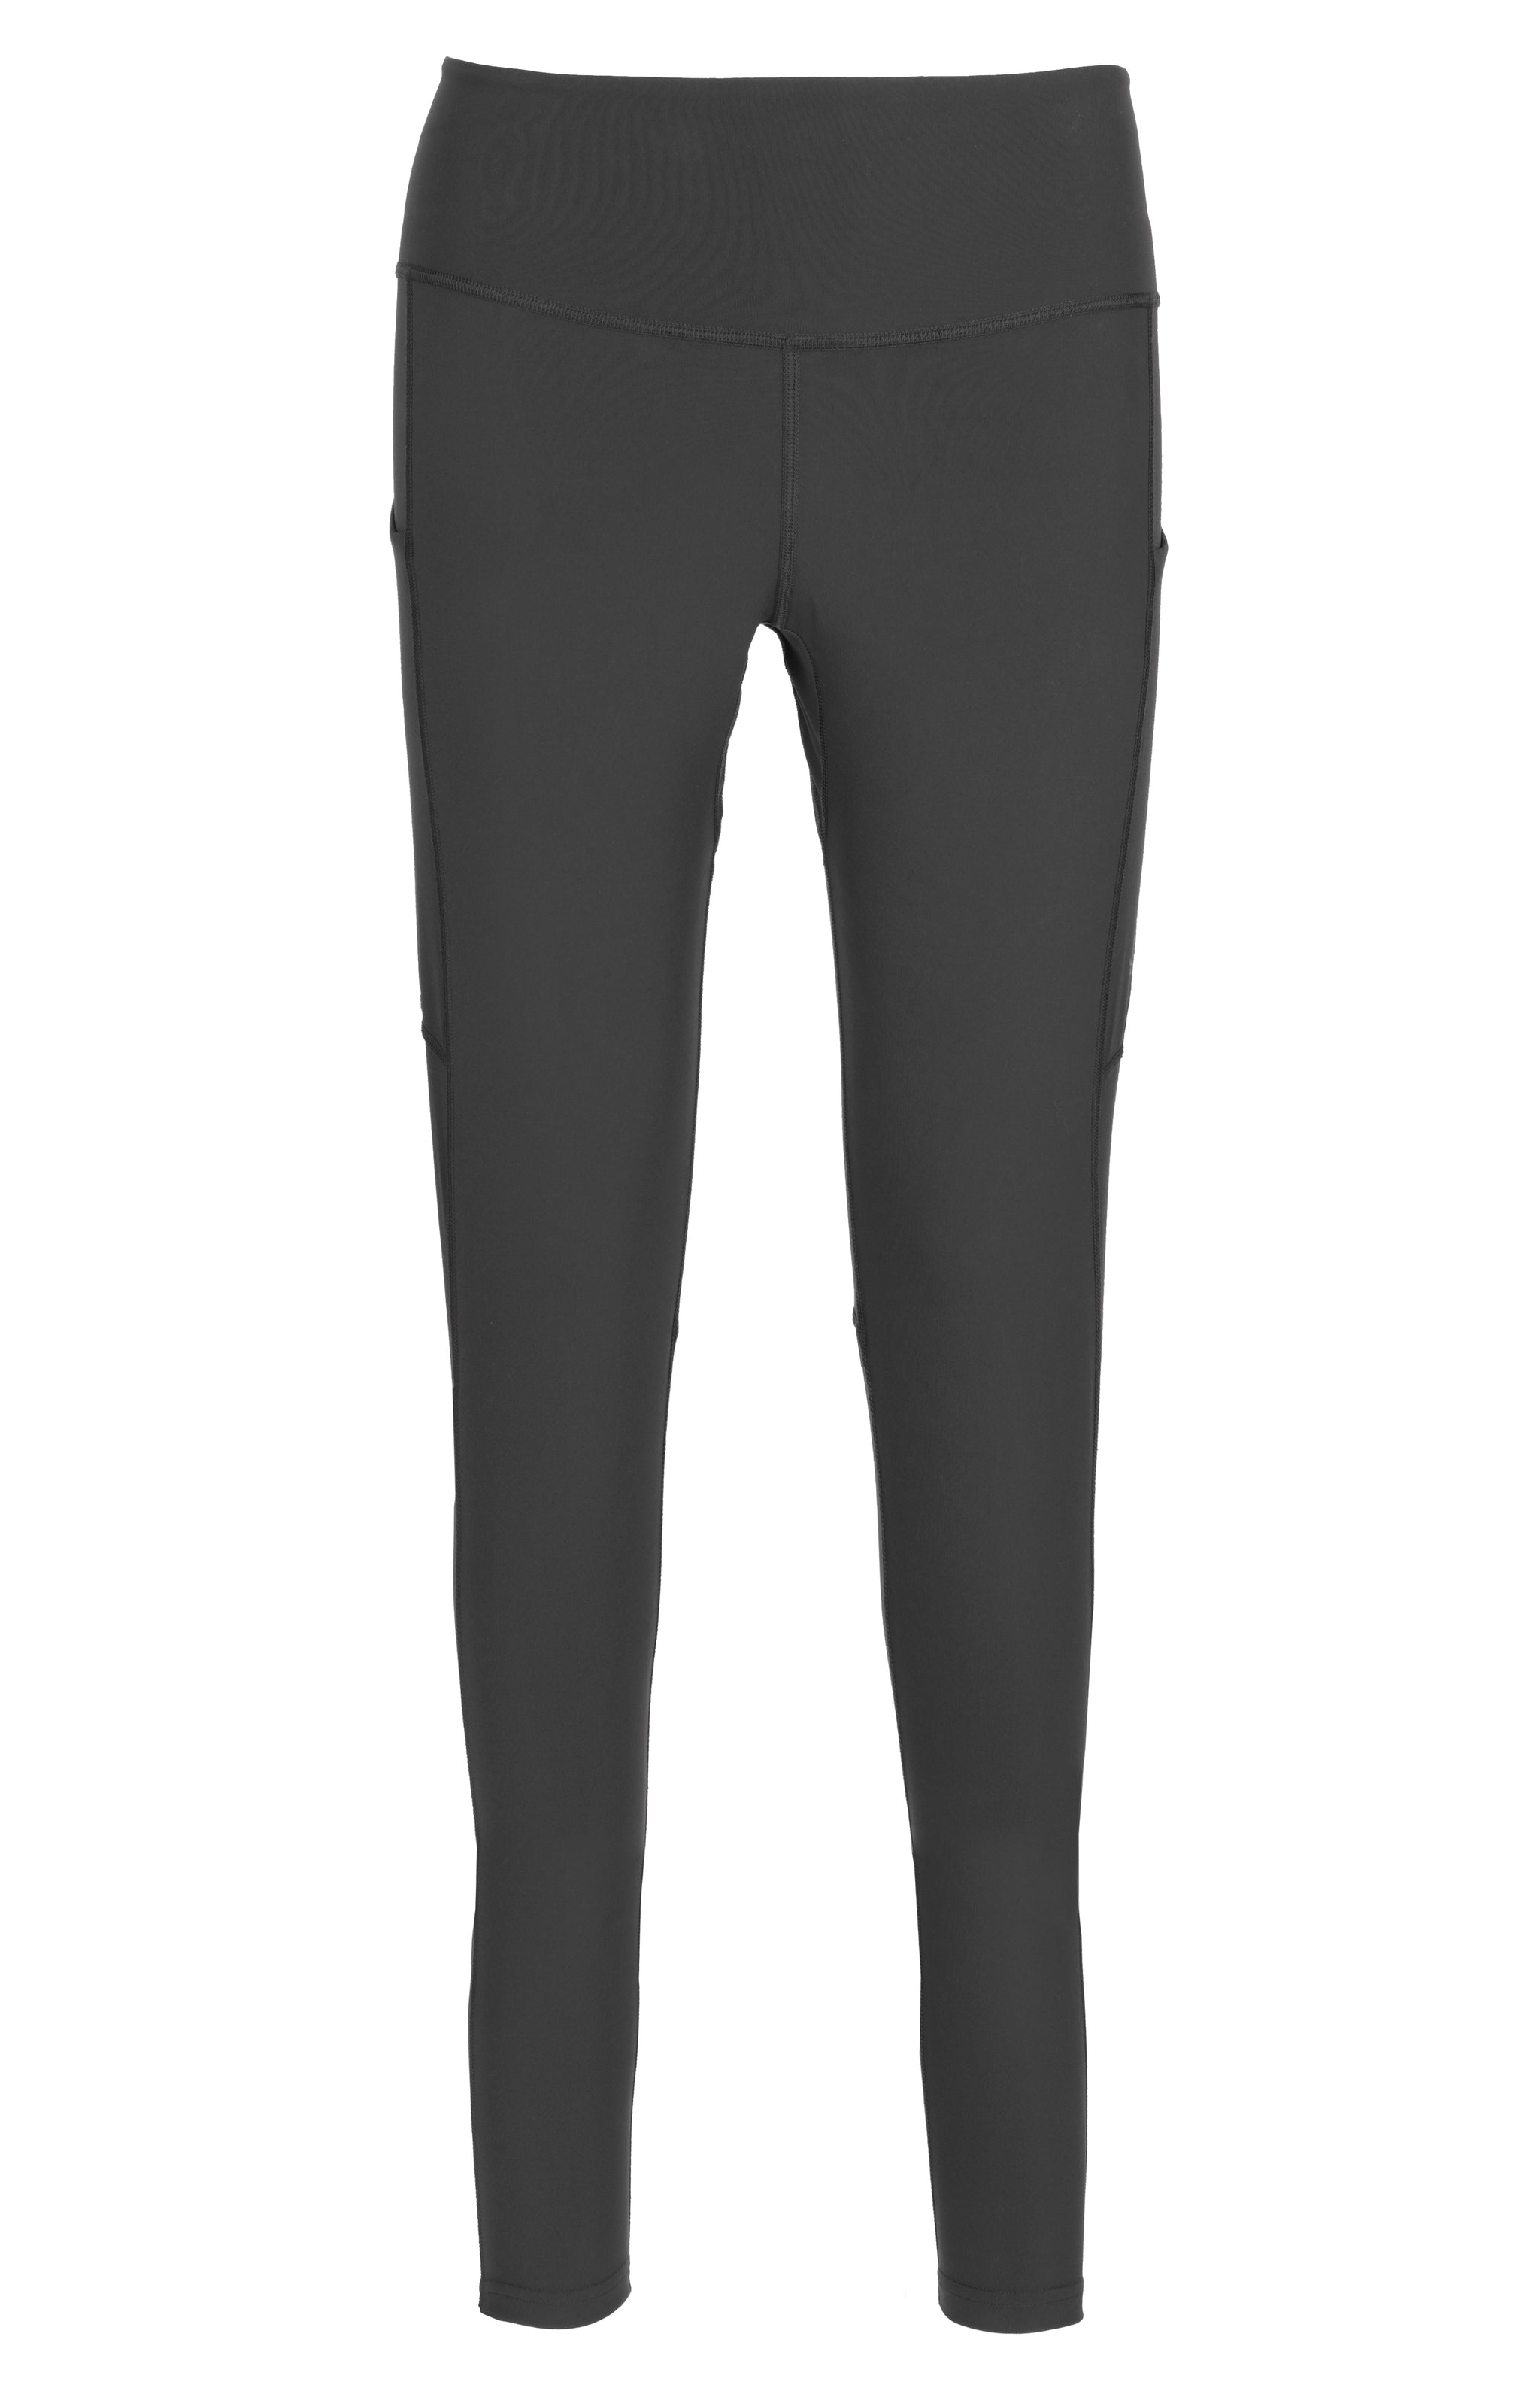 Rab Women's Talus Tights - Outfitters Store